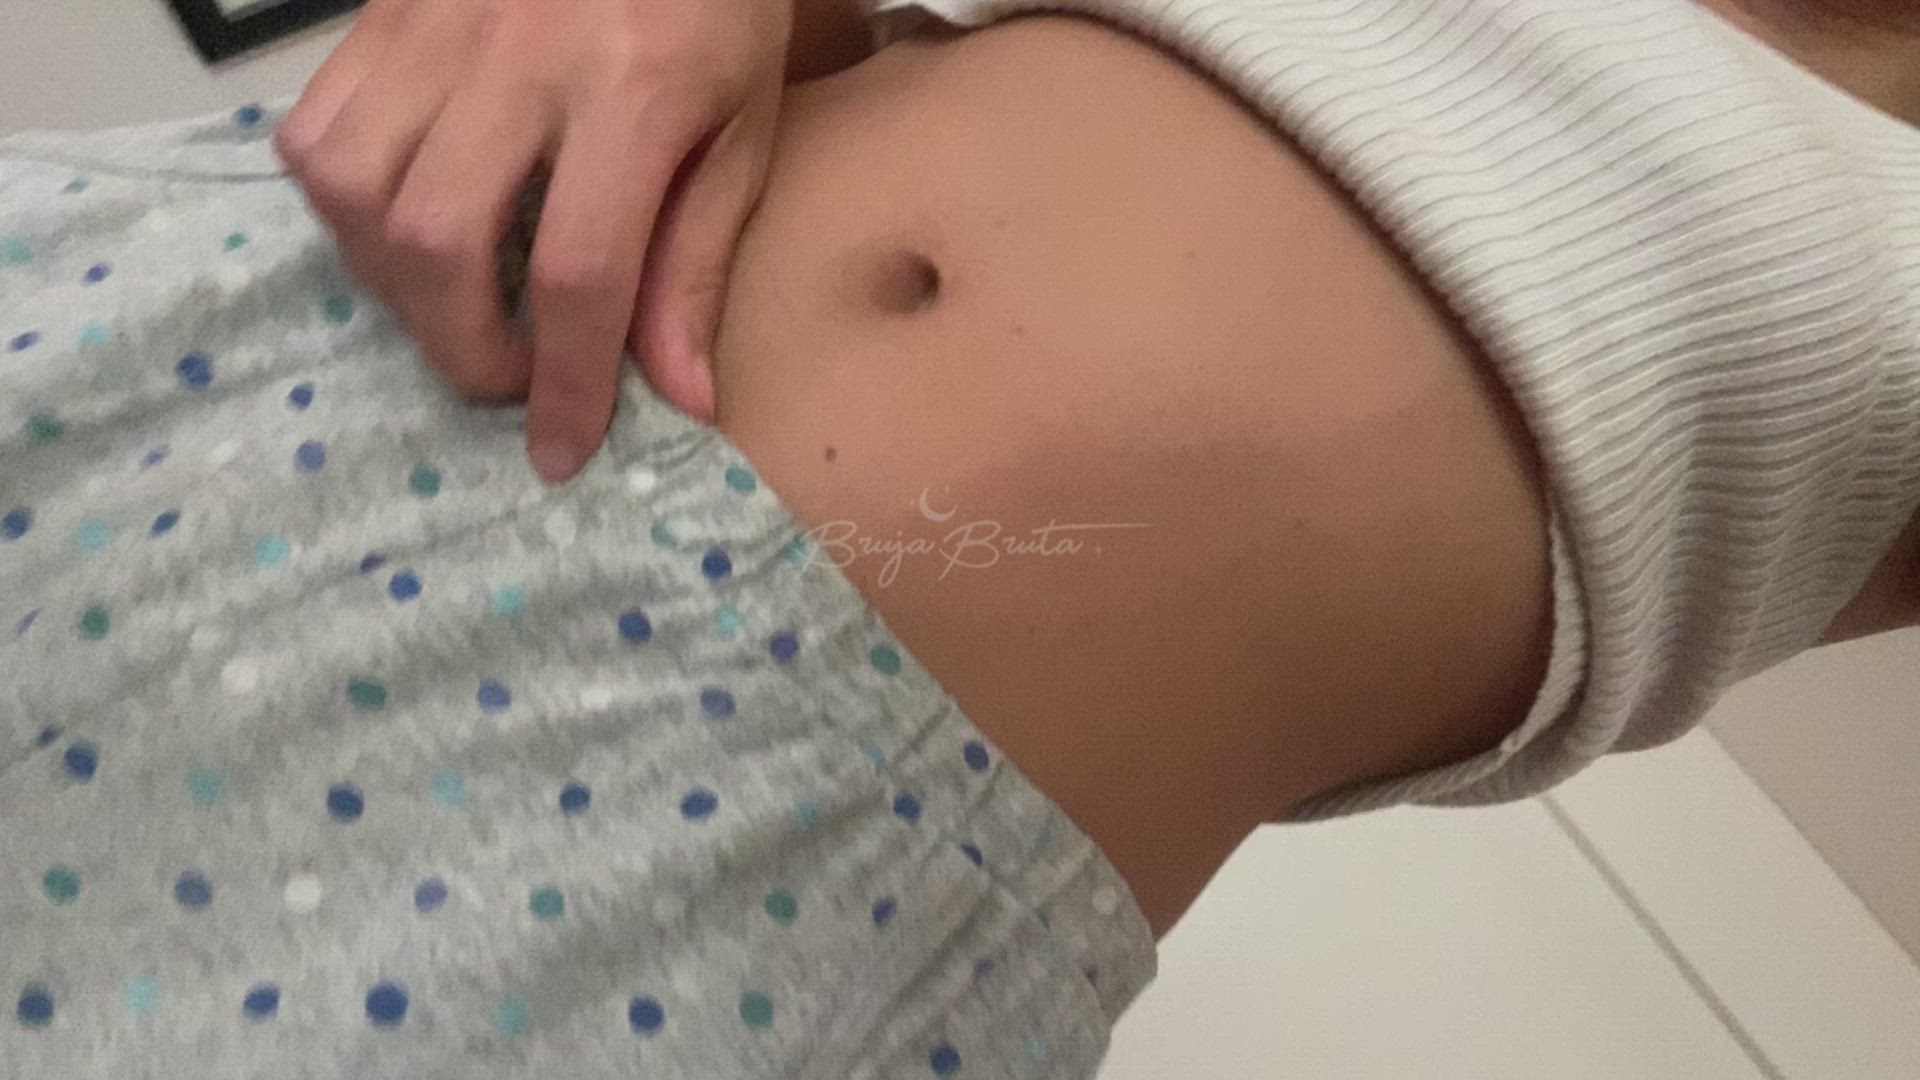 Pussy porn video with onlyfans model bruja bruta <strong>@brujabruta.vip</strong>